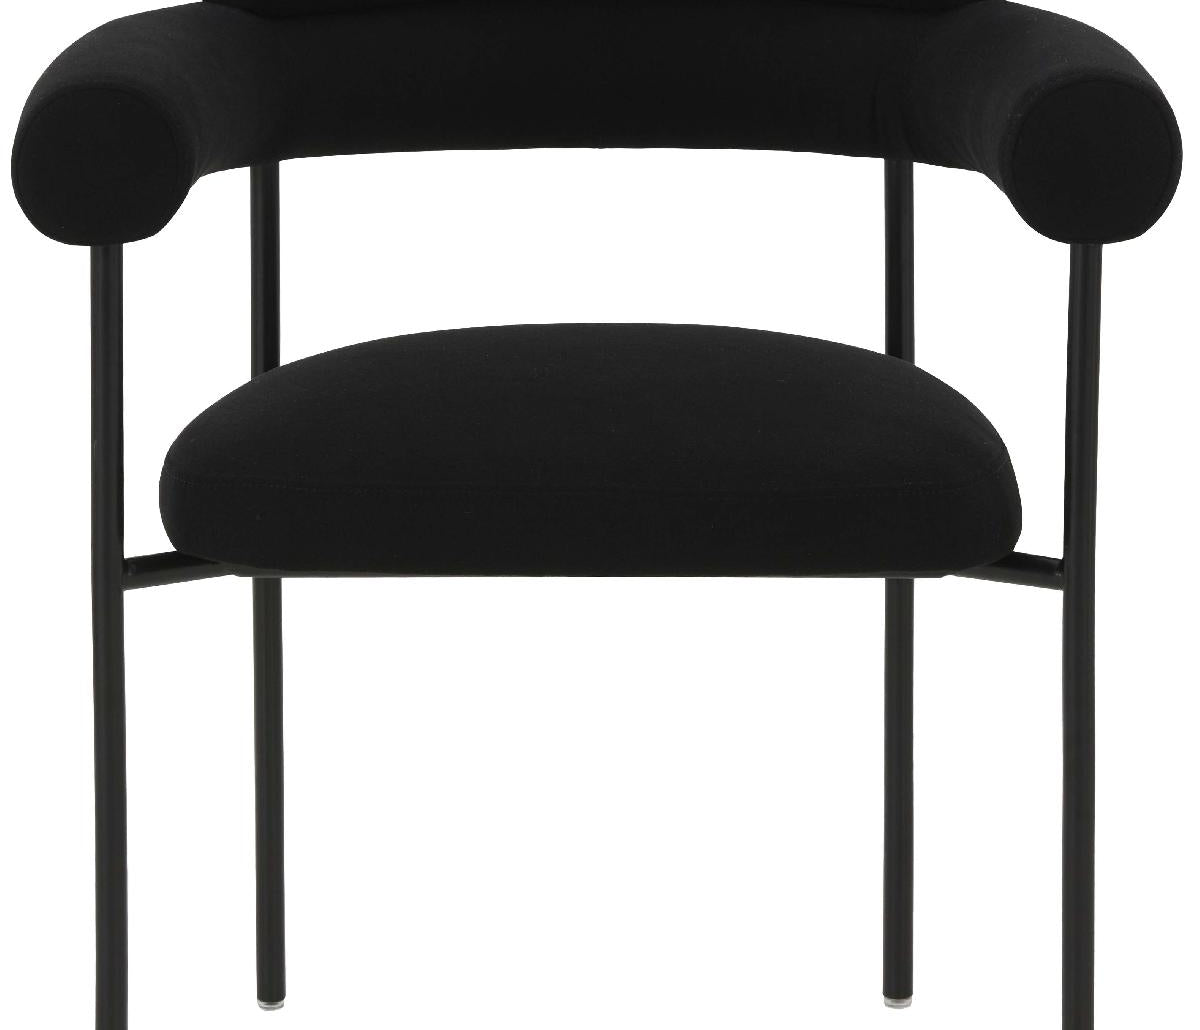 Safavieh Couture Jaslene Curved Back Dining Chair